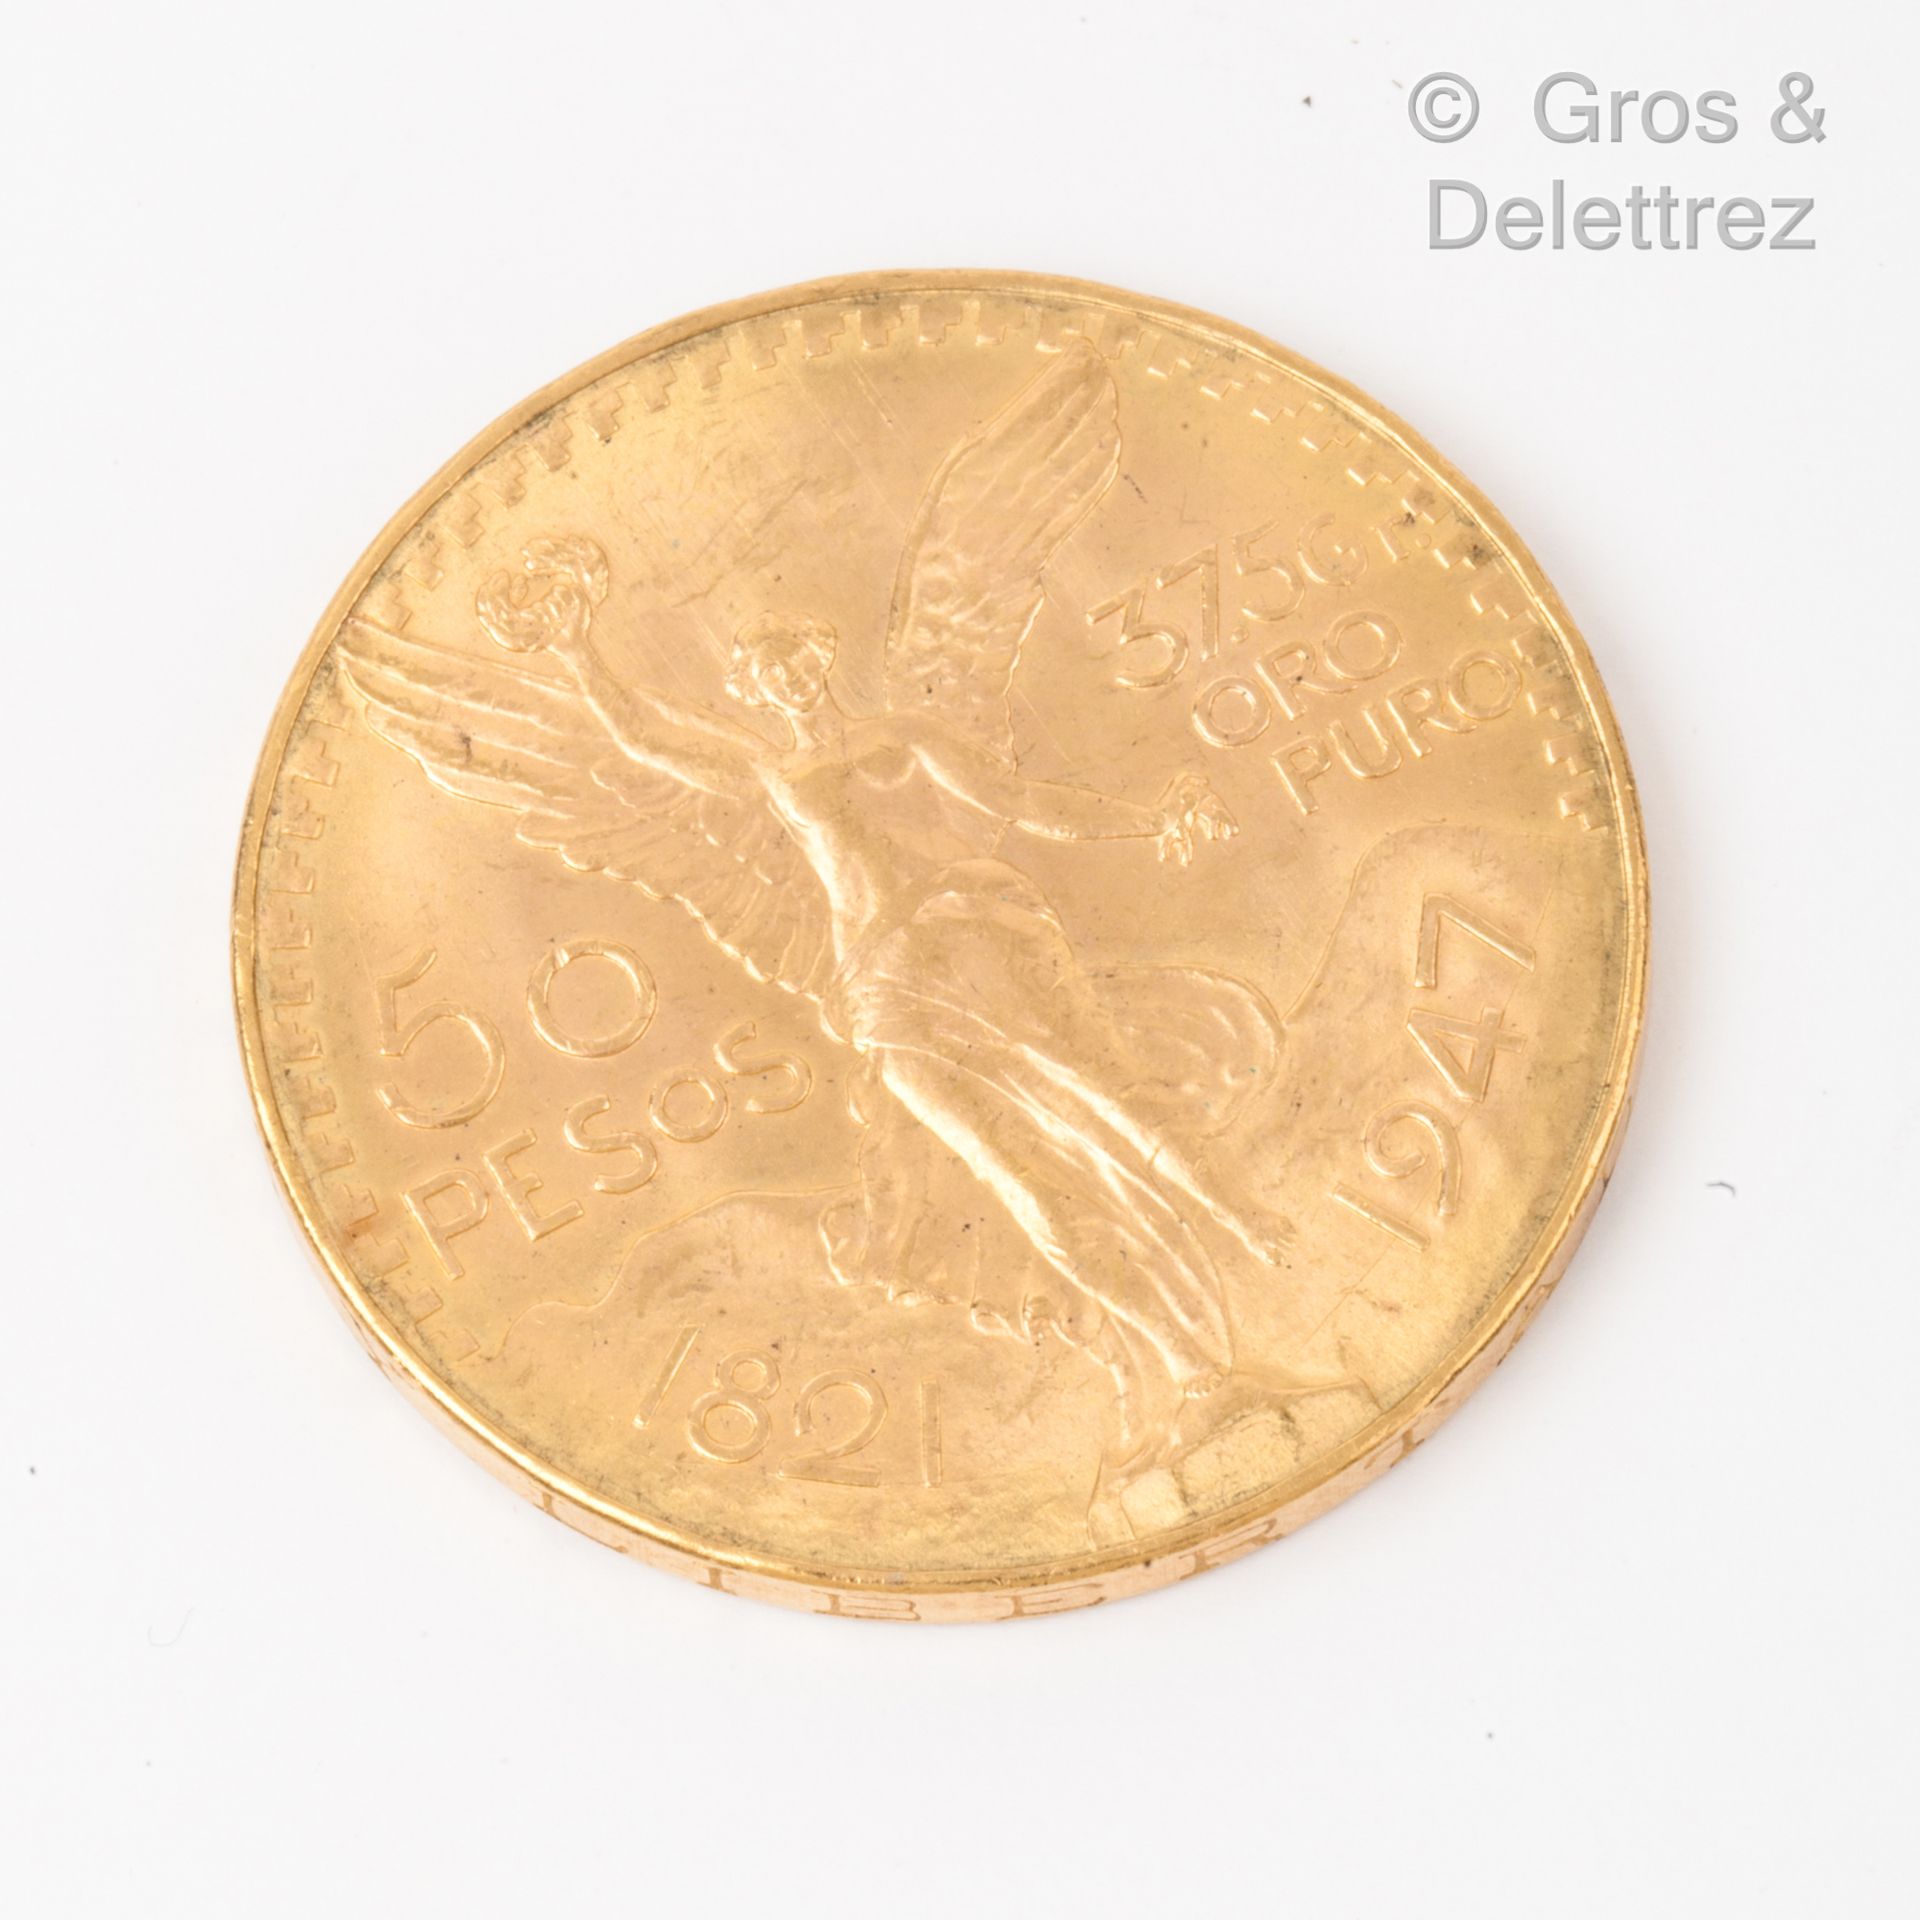 Null Coin of 50 Mexican Pesos in gold. (1821-1947) Gross weight : 41,8g.